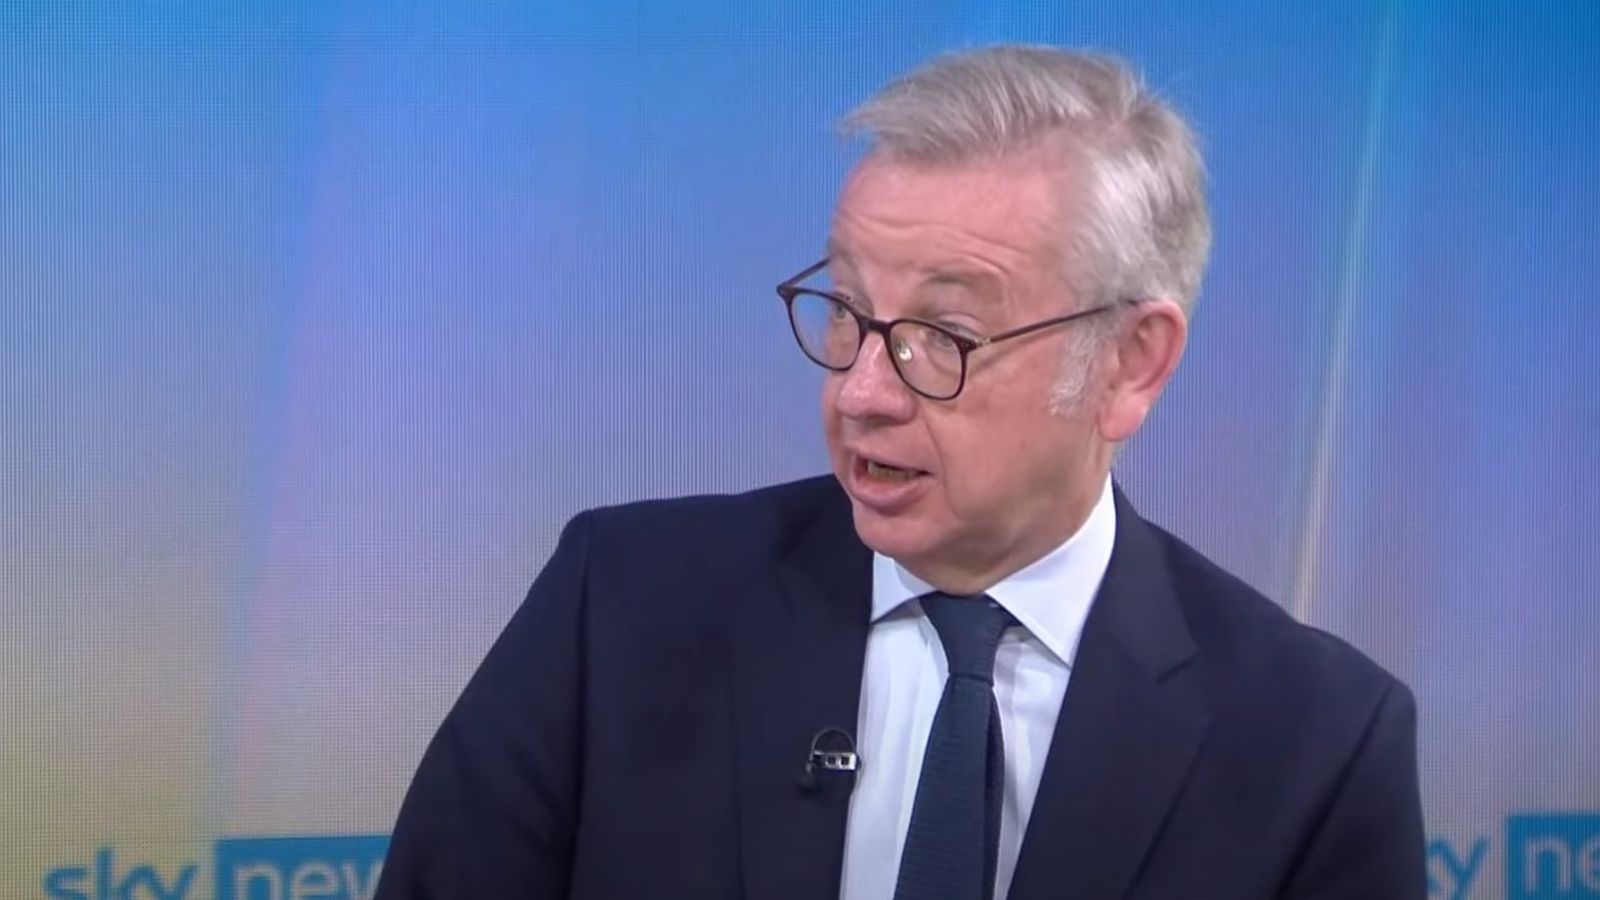 Michael Gove going on holiday to wildfire-hit Greek island of Evia - and says official advice is region is 'safe'